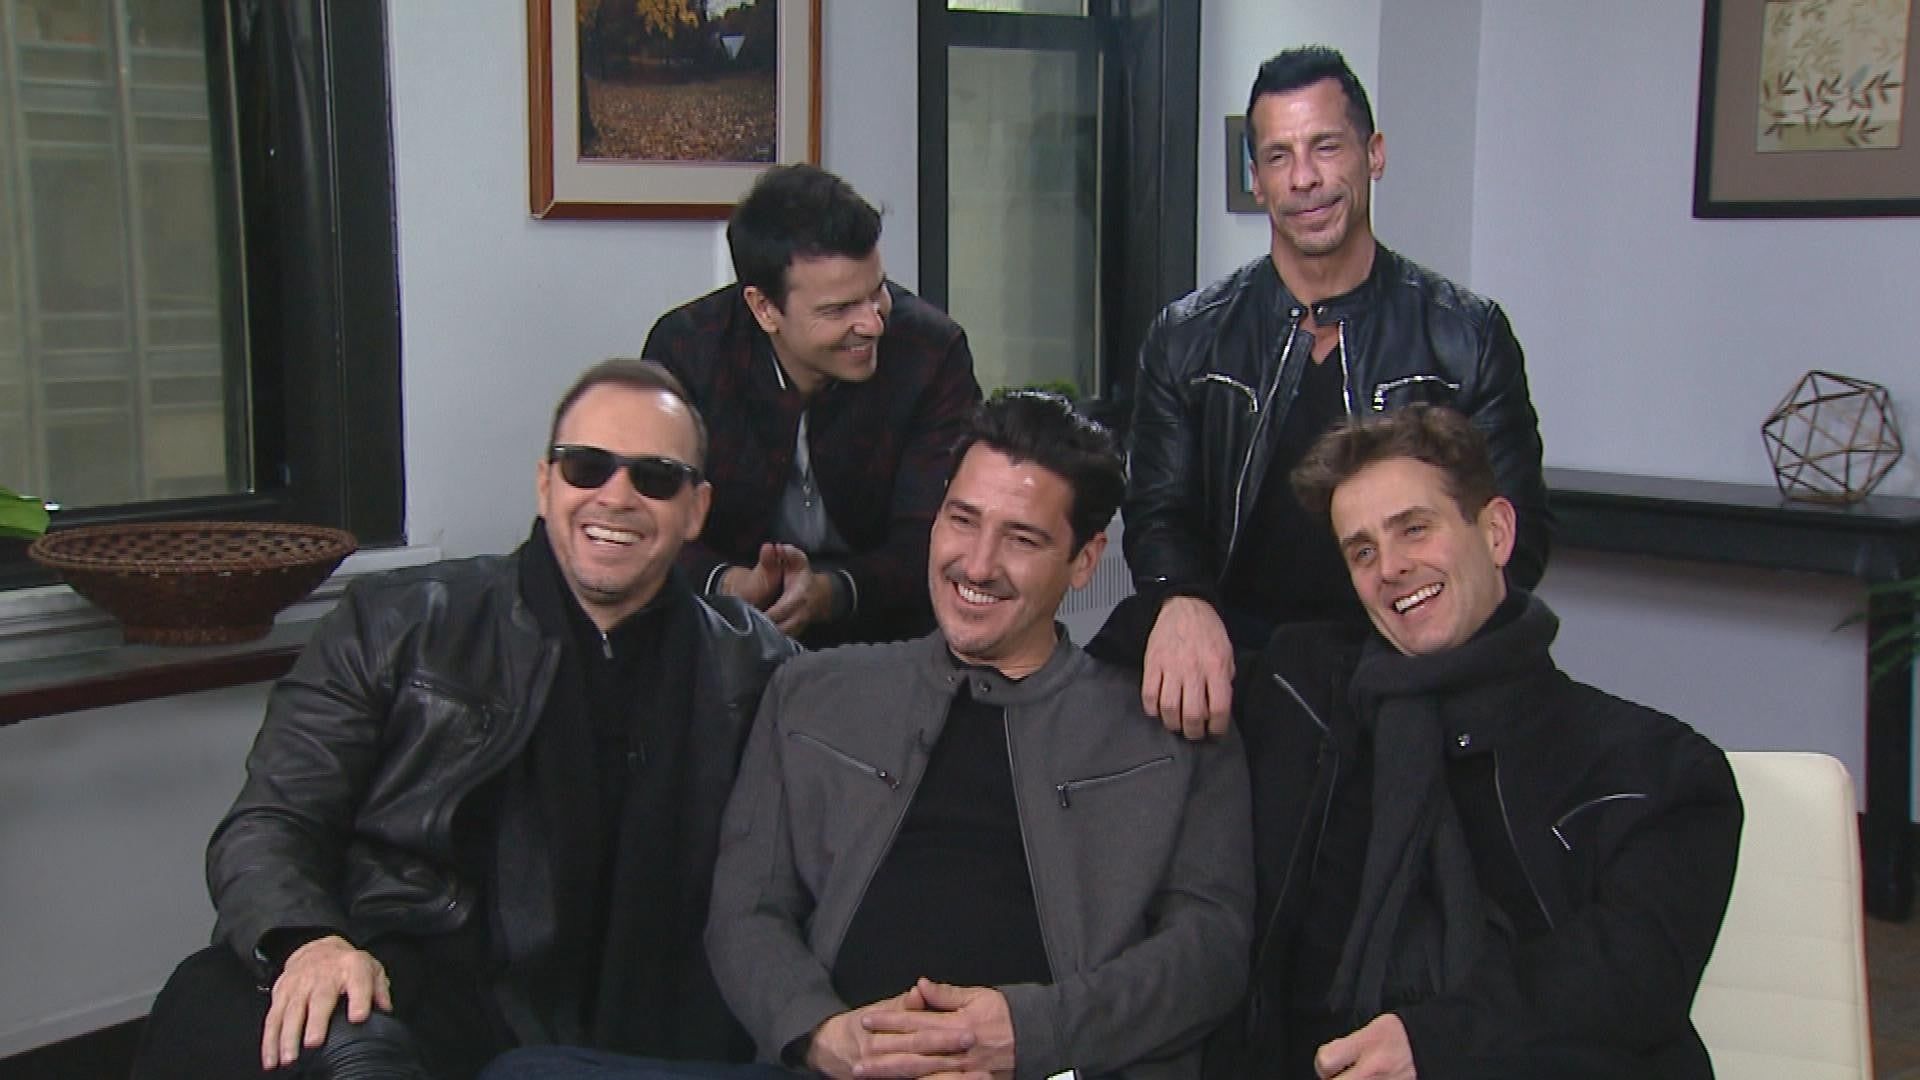 New Kids on the Block Say They've 'Gotten So Much Love' After